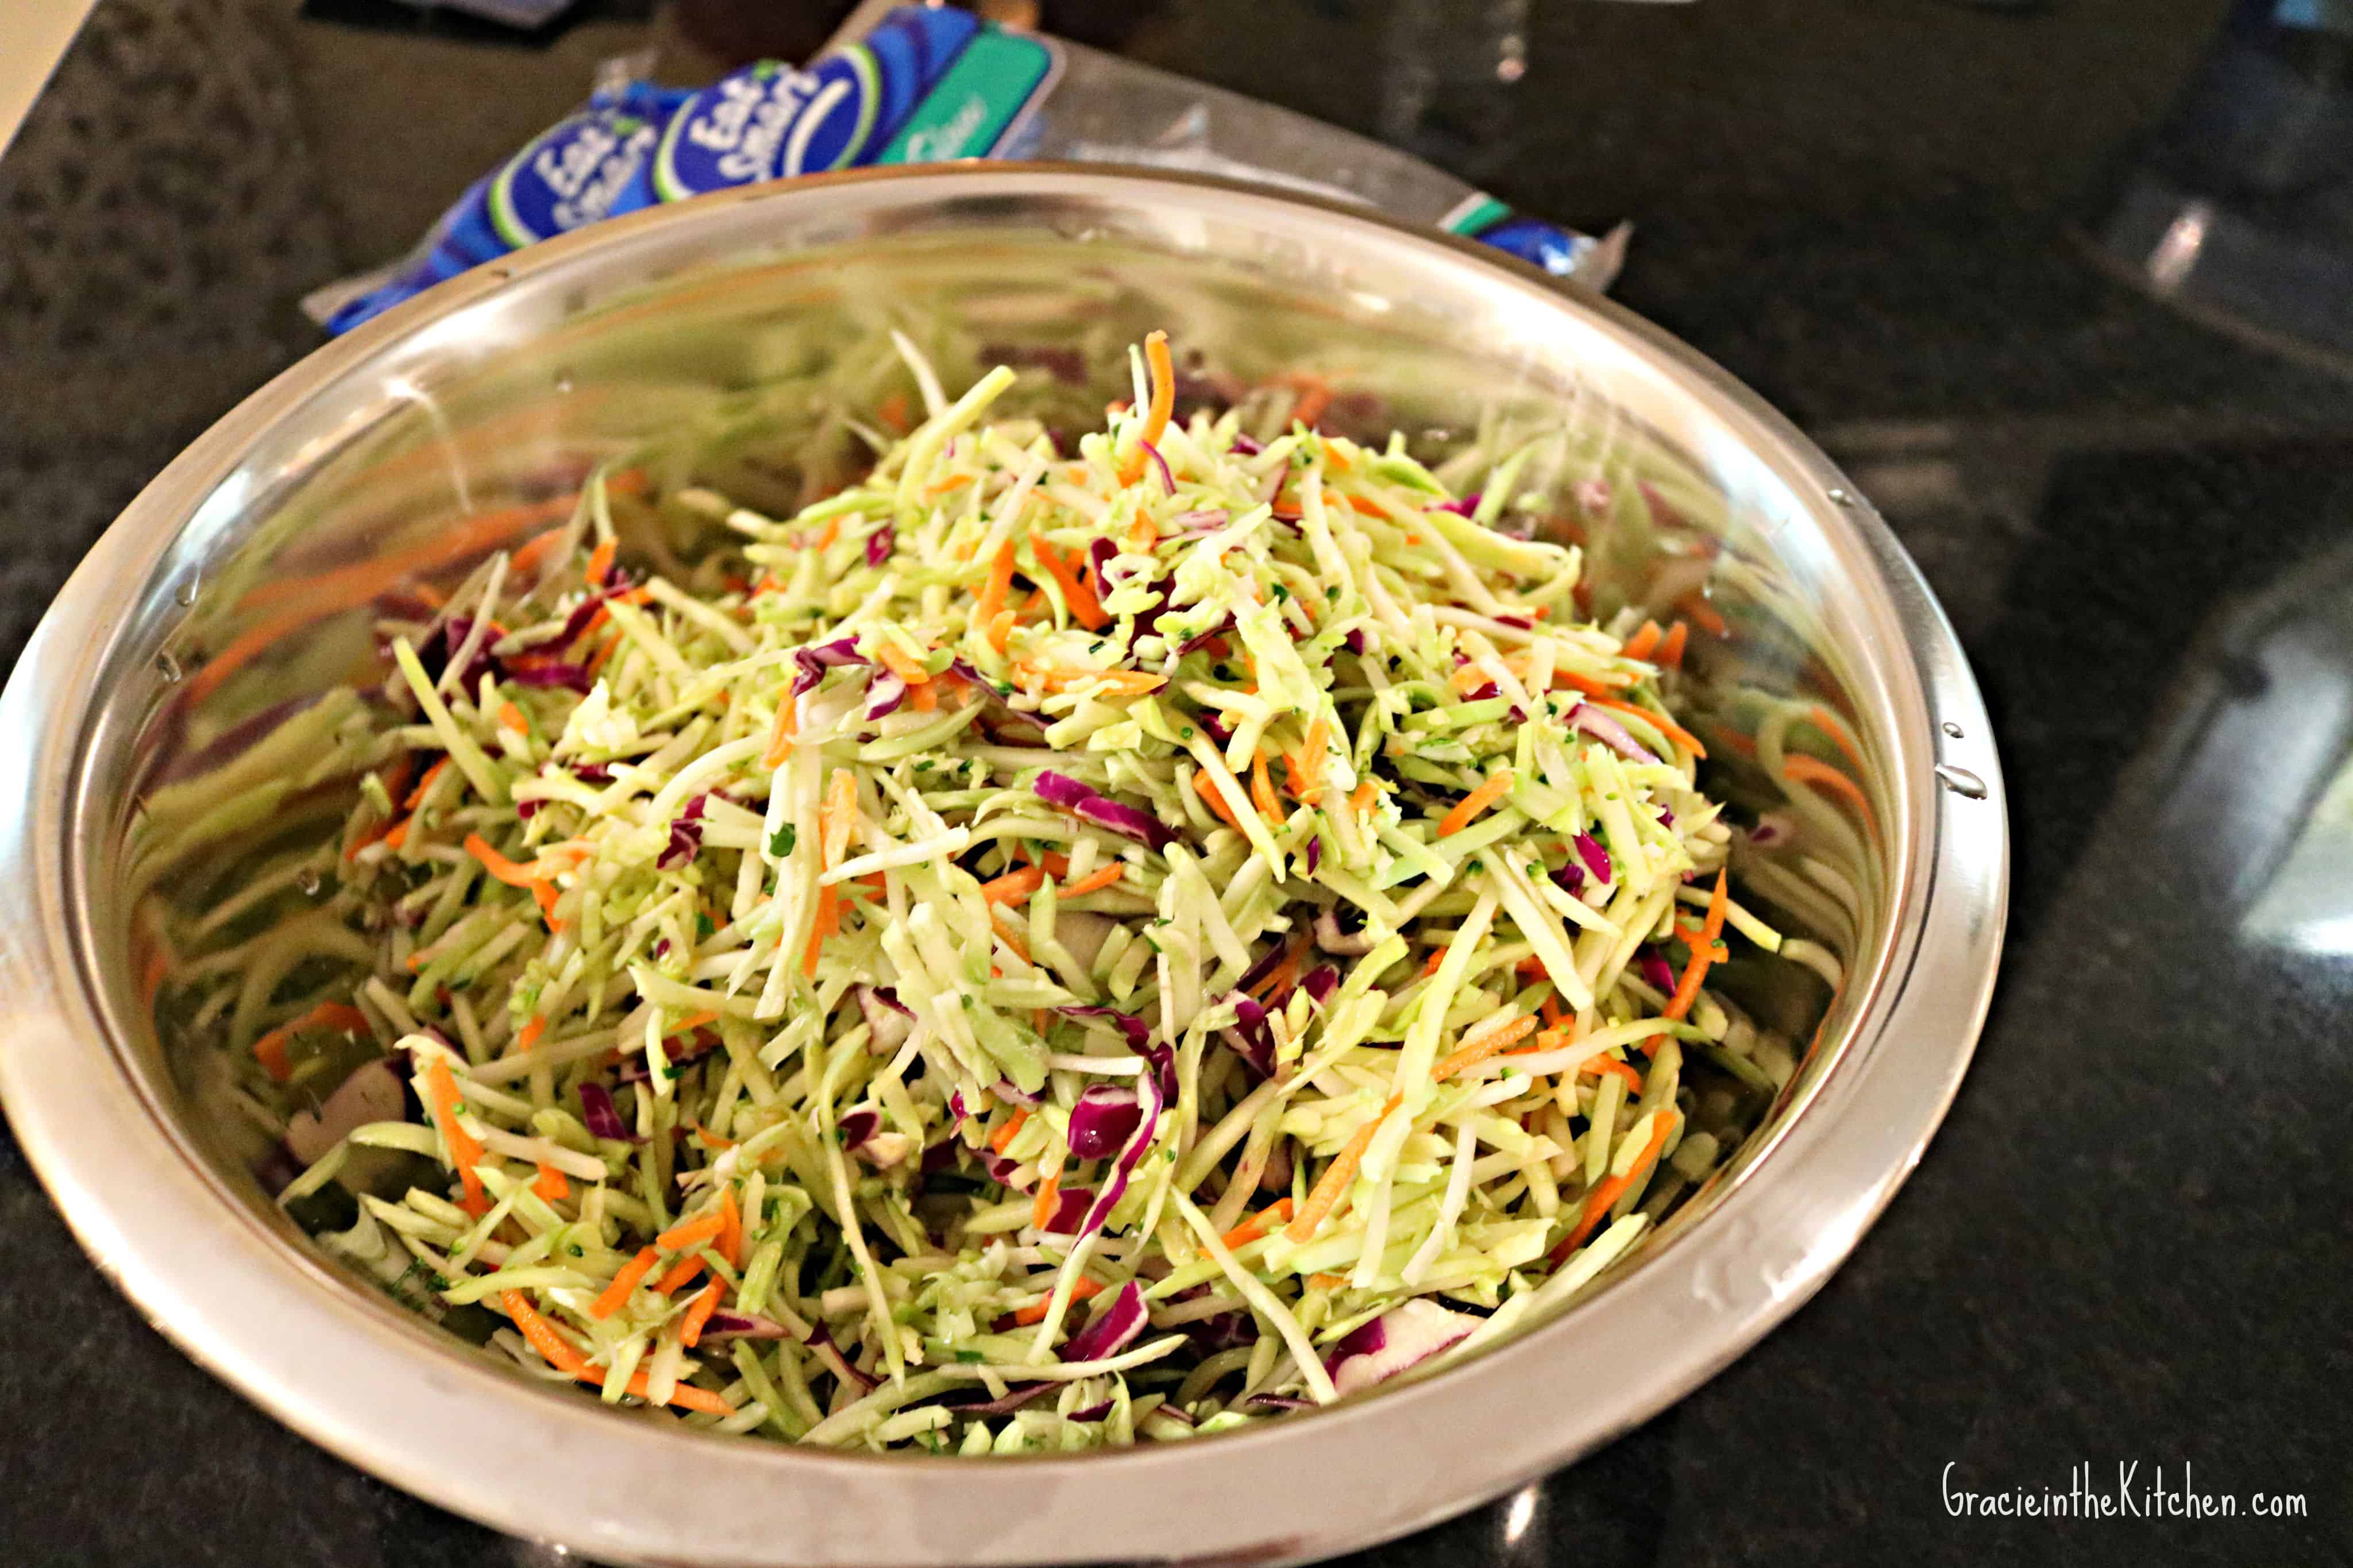 This delicious Broccoli Slaw Recipe is the BEST! So flavorful and simple to make!